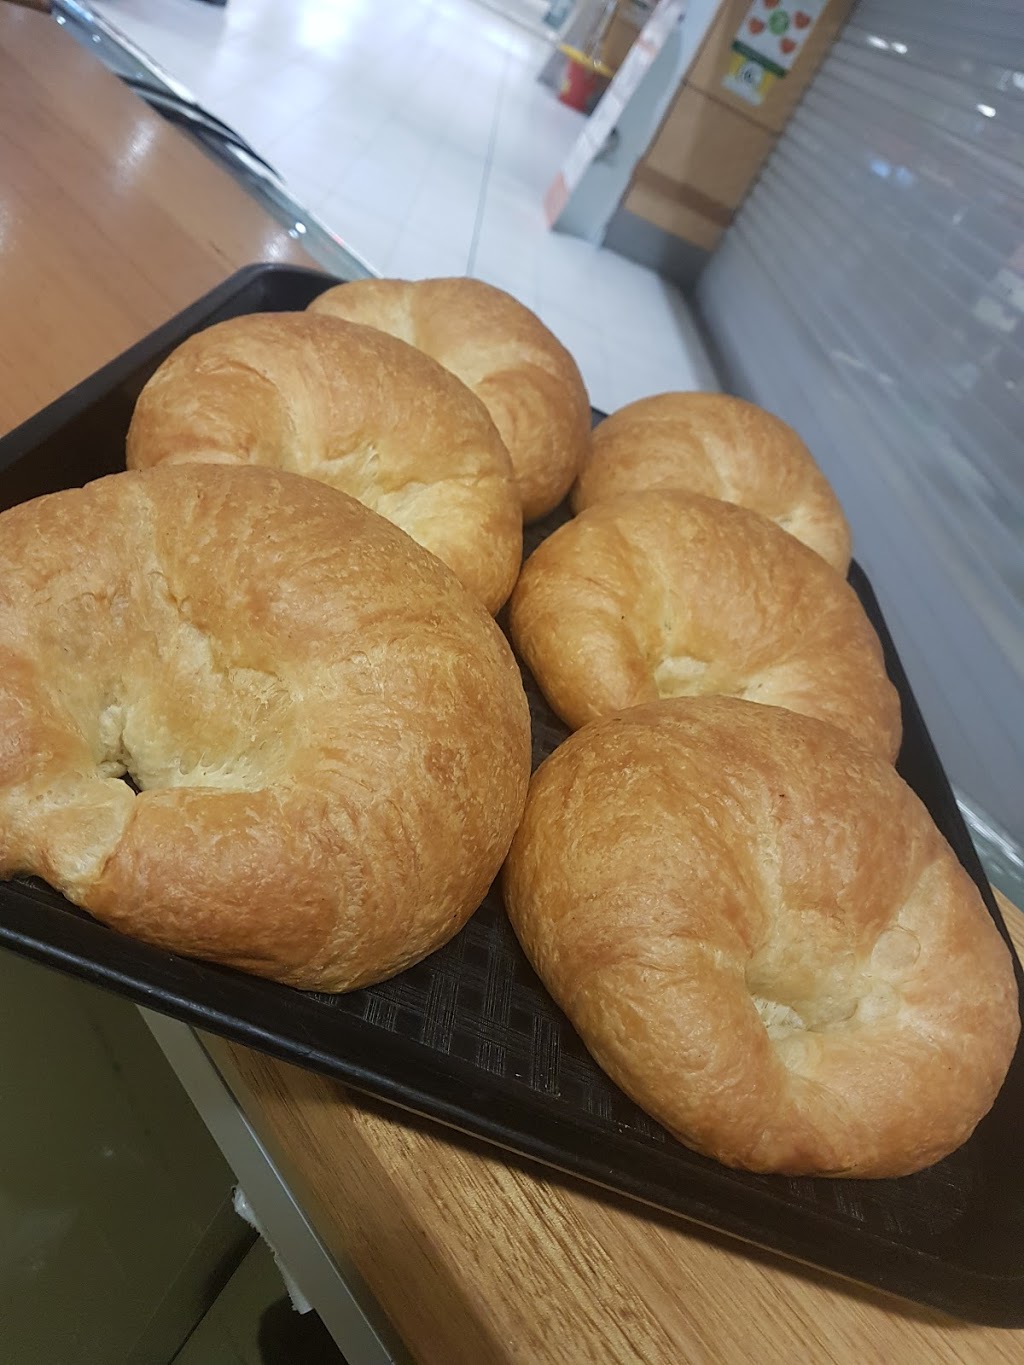 Bread World Bakery Cafe | bakery | 205 Greens Rd, Wyndham Vale VIC 3024, Australia | 0397317895 OR +61 3 9731 7895